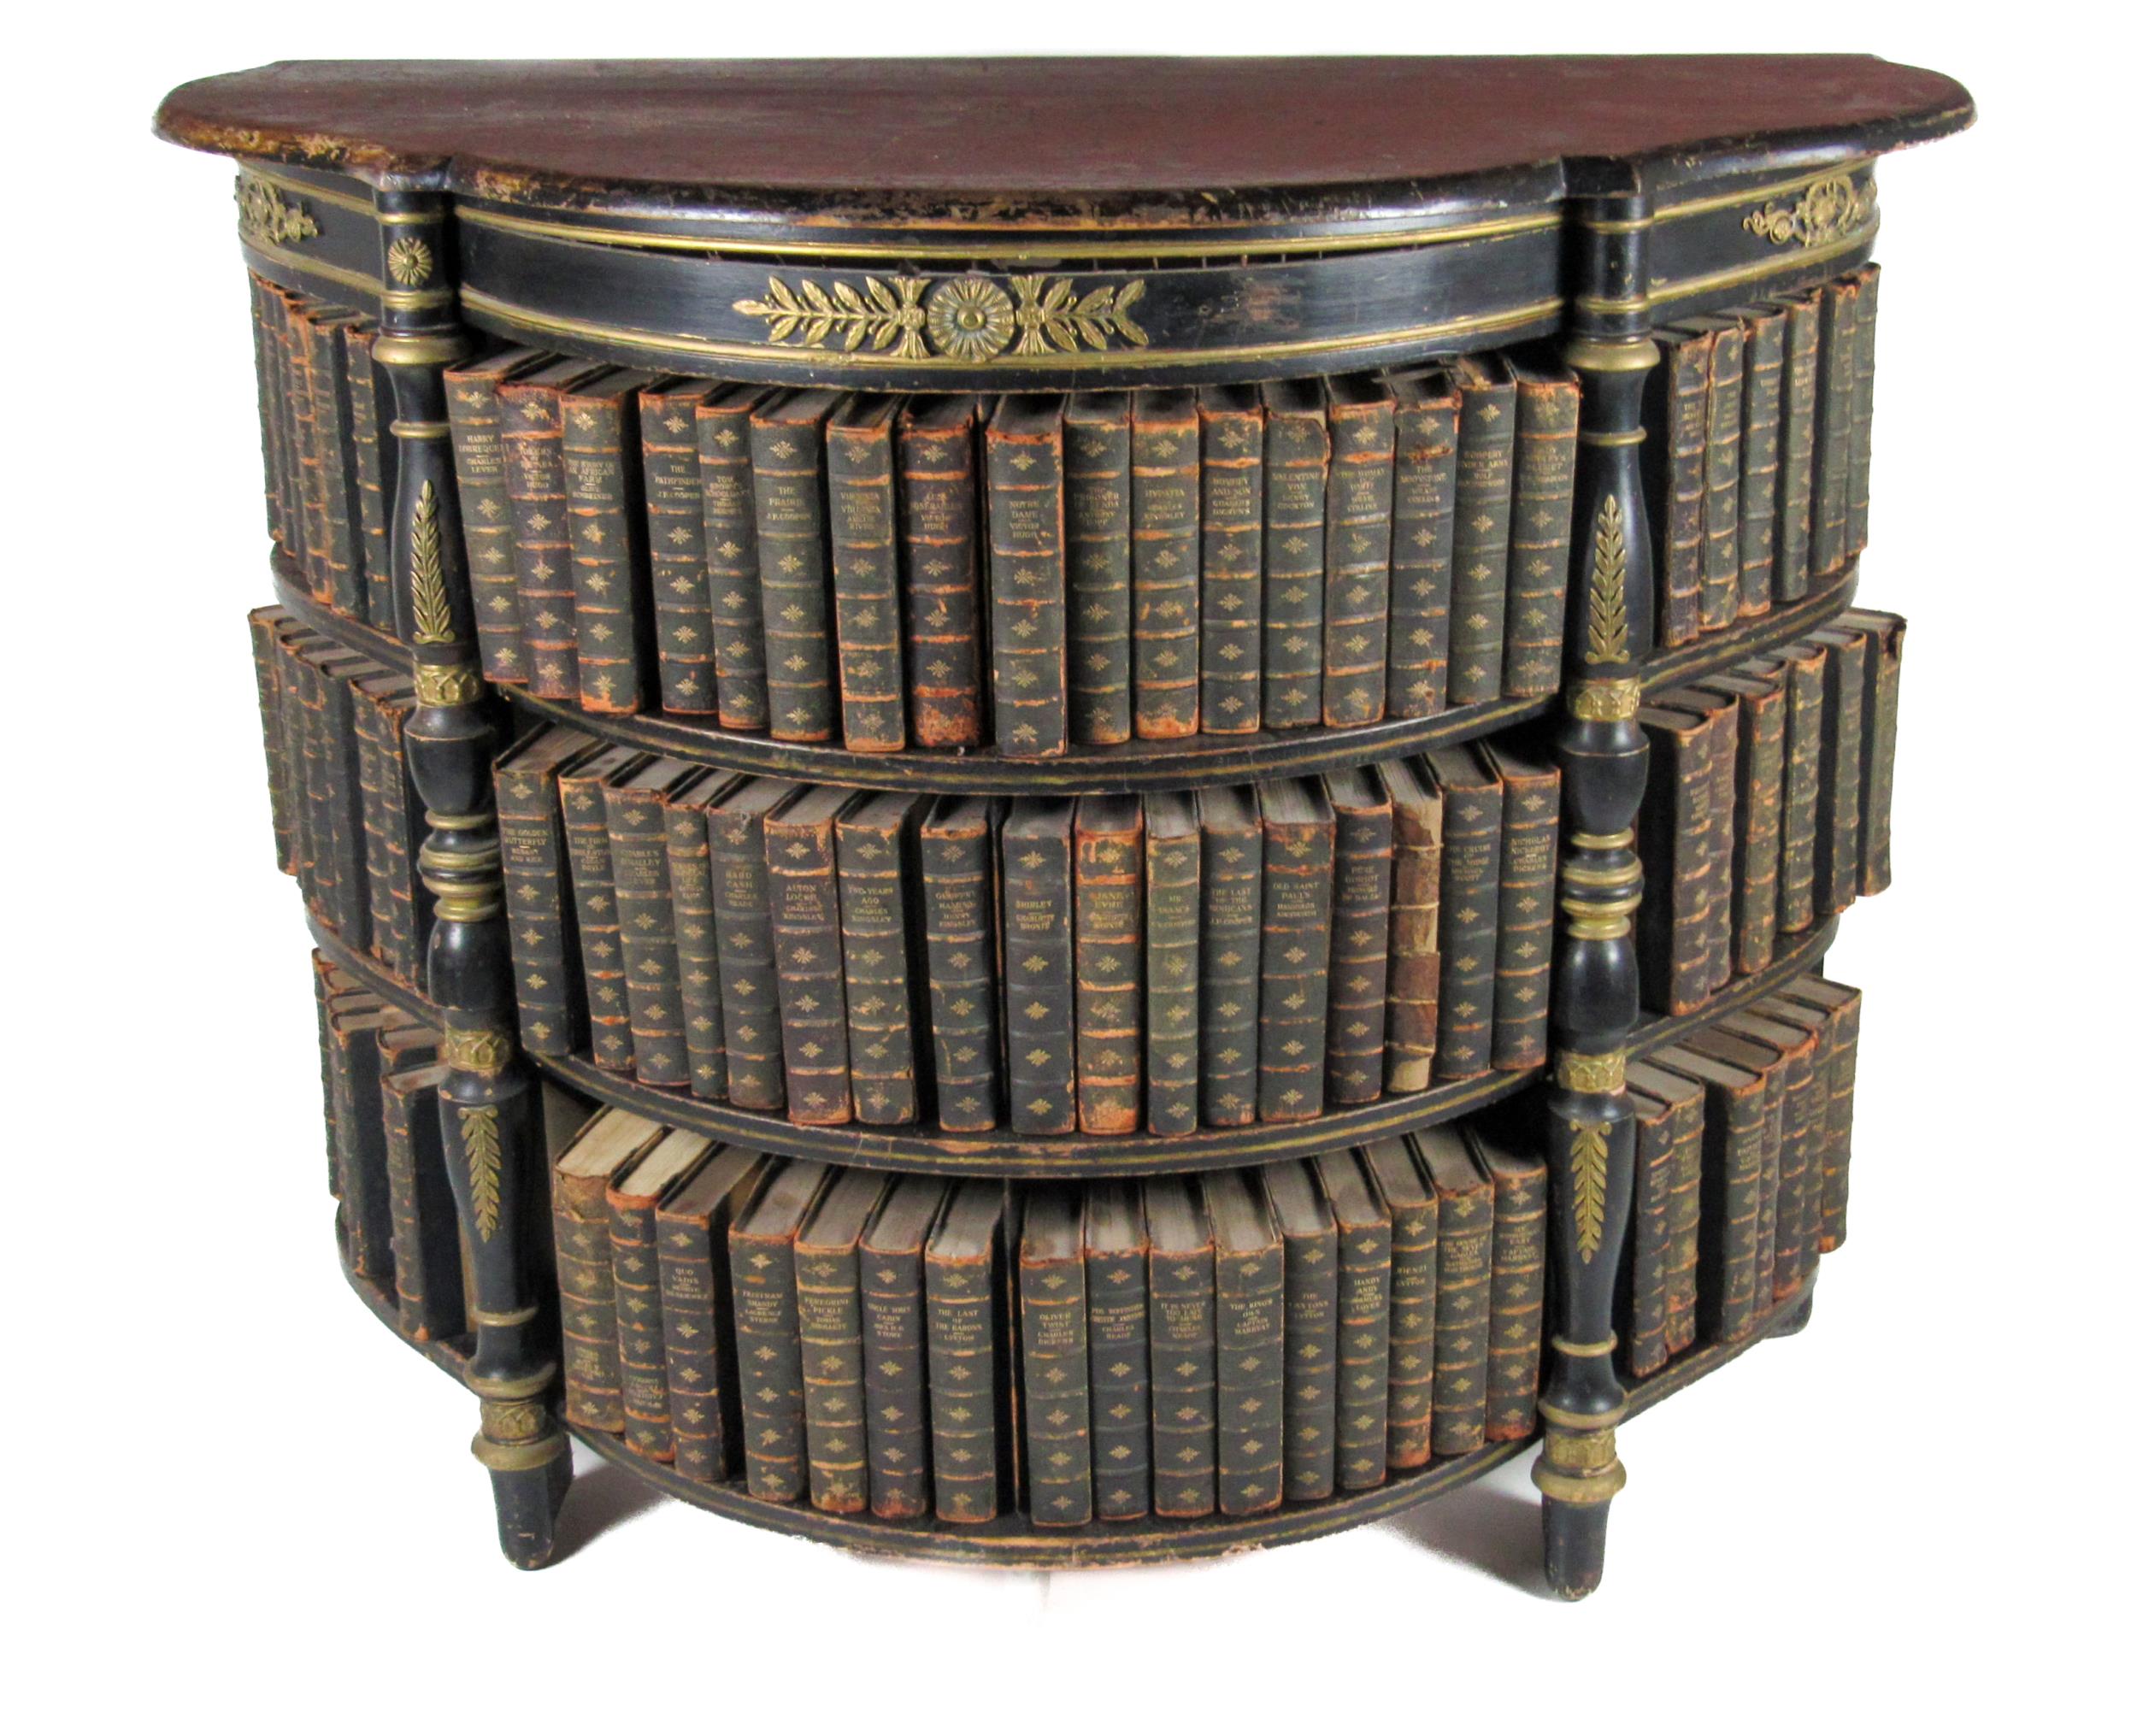 A Regency style shaped ebonised and ormolu mounted Open Bookcase, with three sections and three